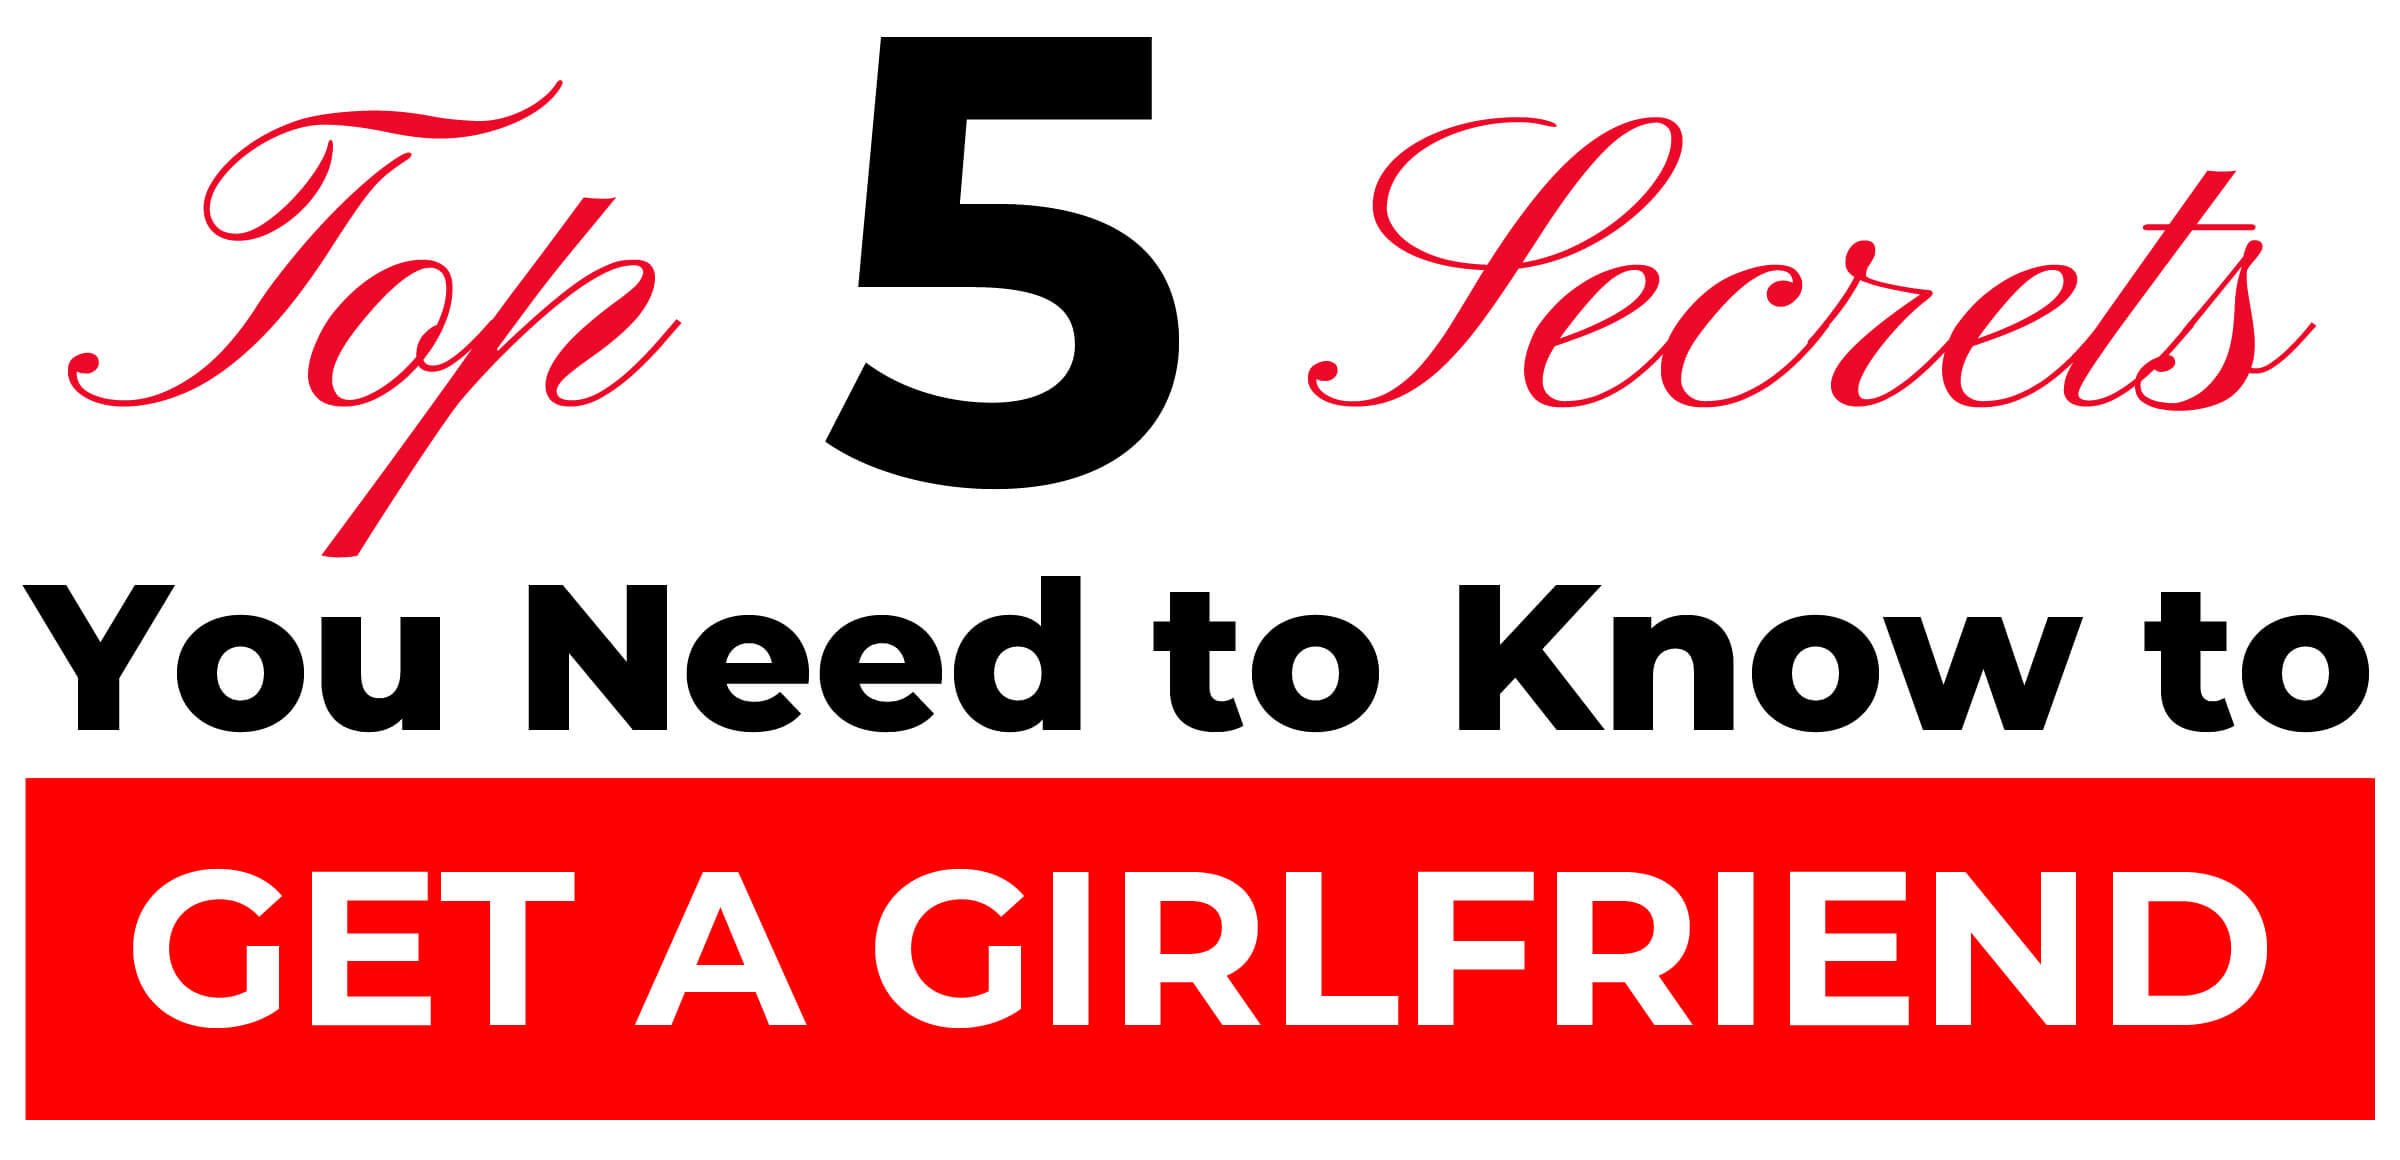 Top 5 secrets you need to know to get a girlfriend